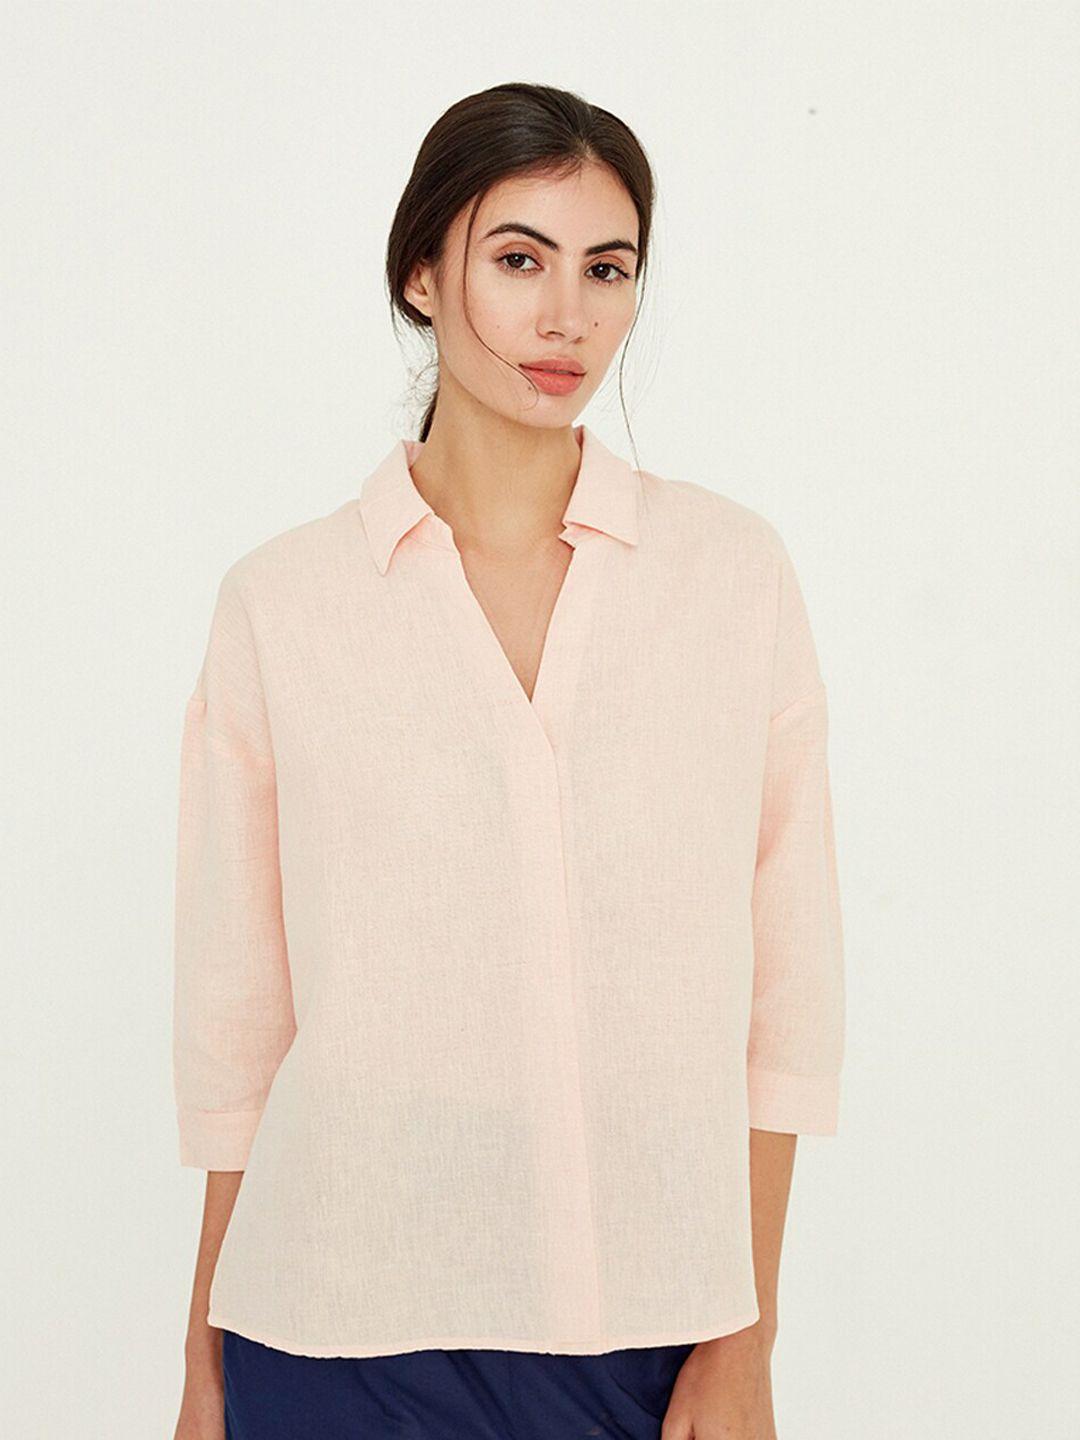 ancestry peach-coloured cotton shirt style top